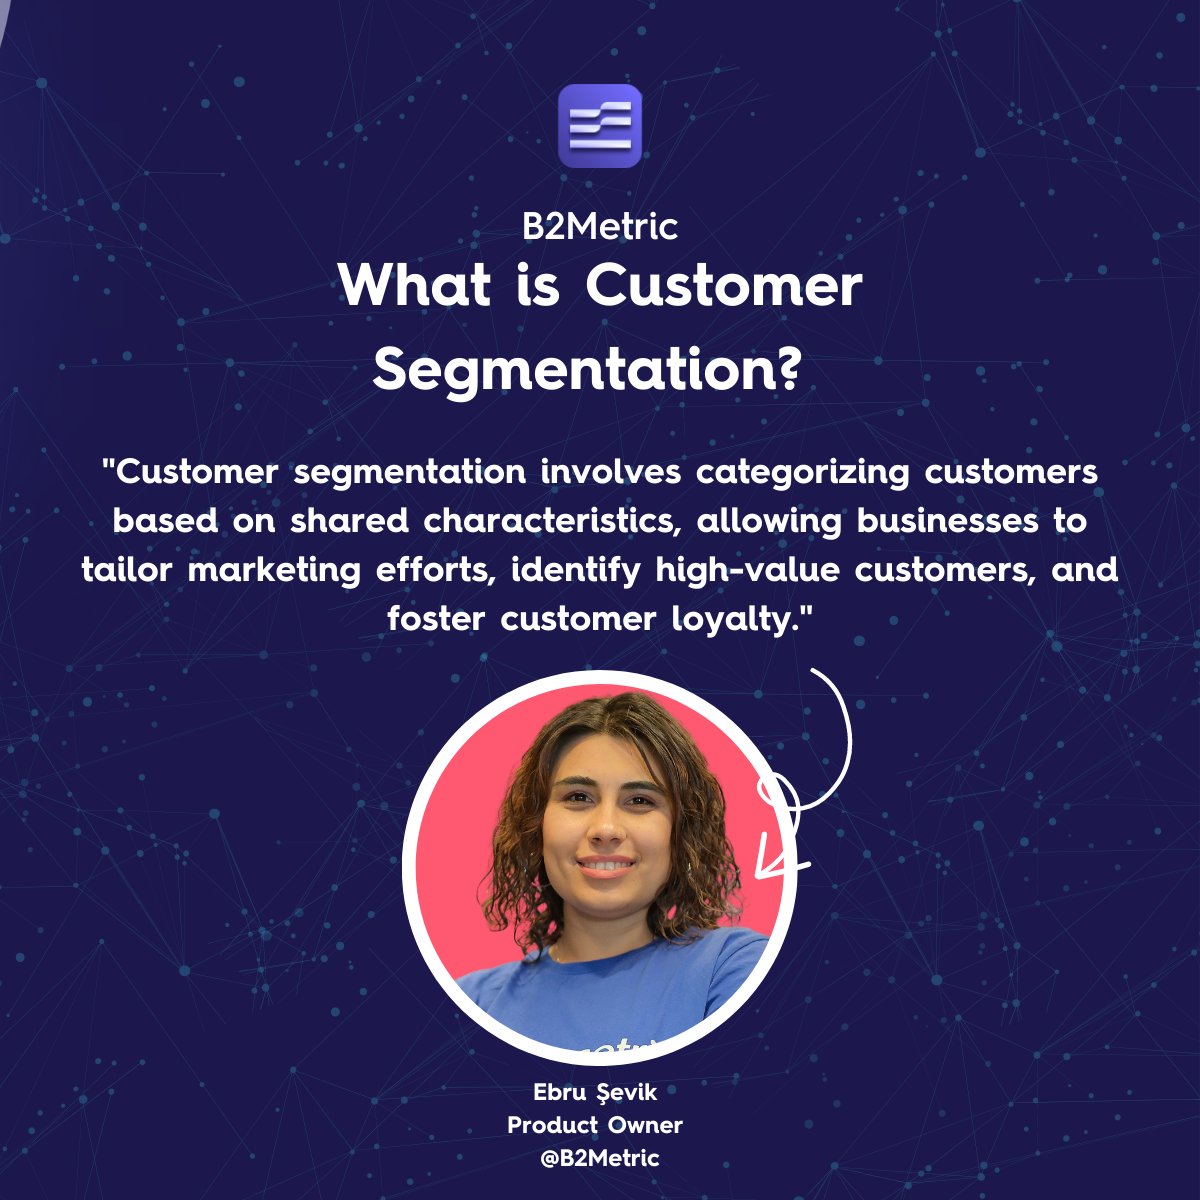 Customer segmentation enables customized marketing, identifies high-value customers, and fosters loyalty.

Learn #customersegmentation fundamentals from experts like Ebru Şevik:

👉 For more, visit here: lnkd.in/dhpz3UHS

#B2Metric #CustomerLoyalty #Personalization